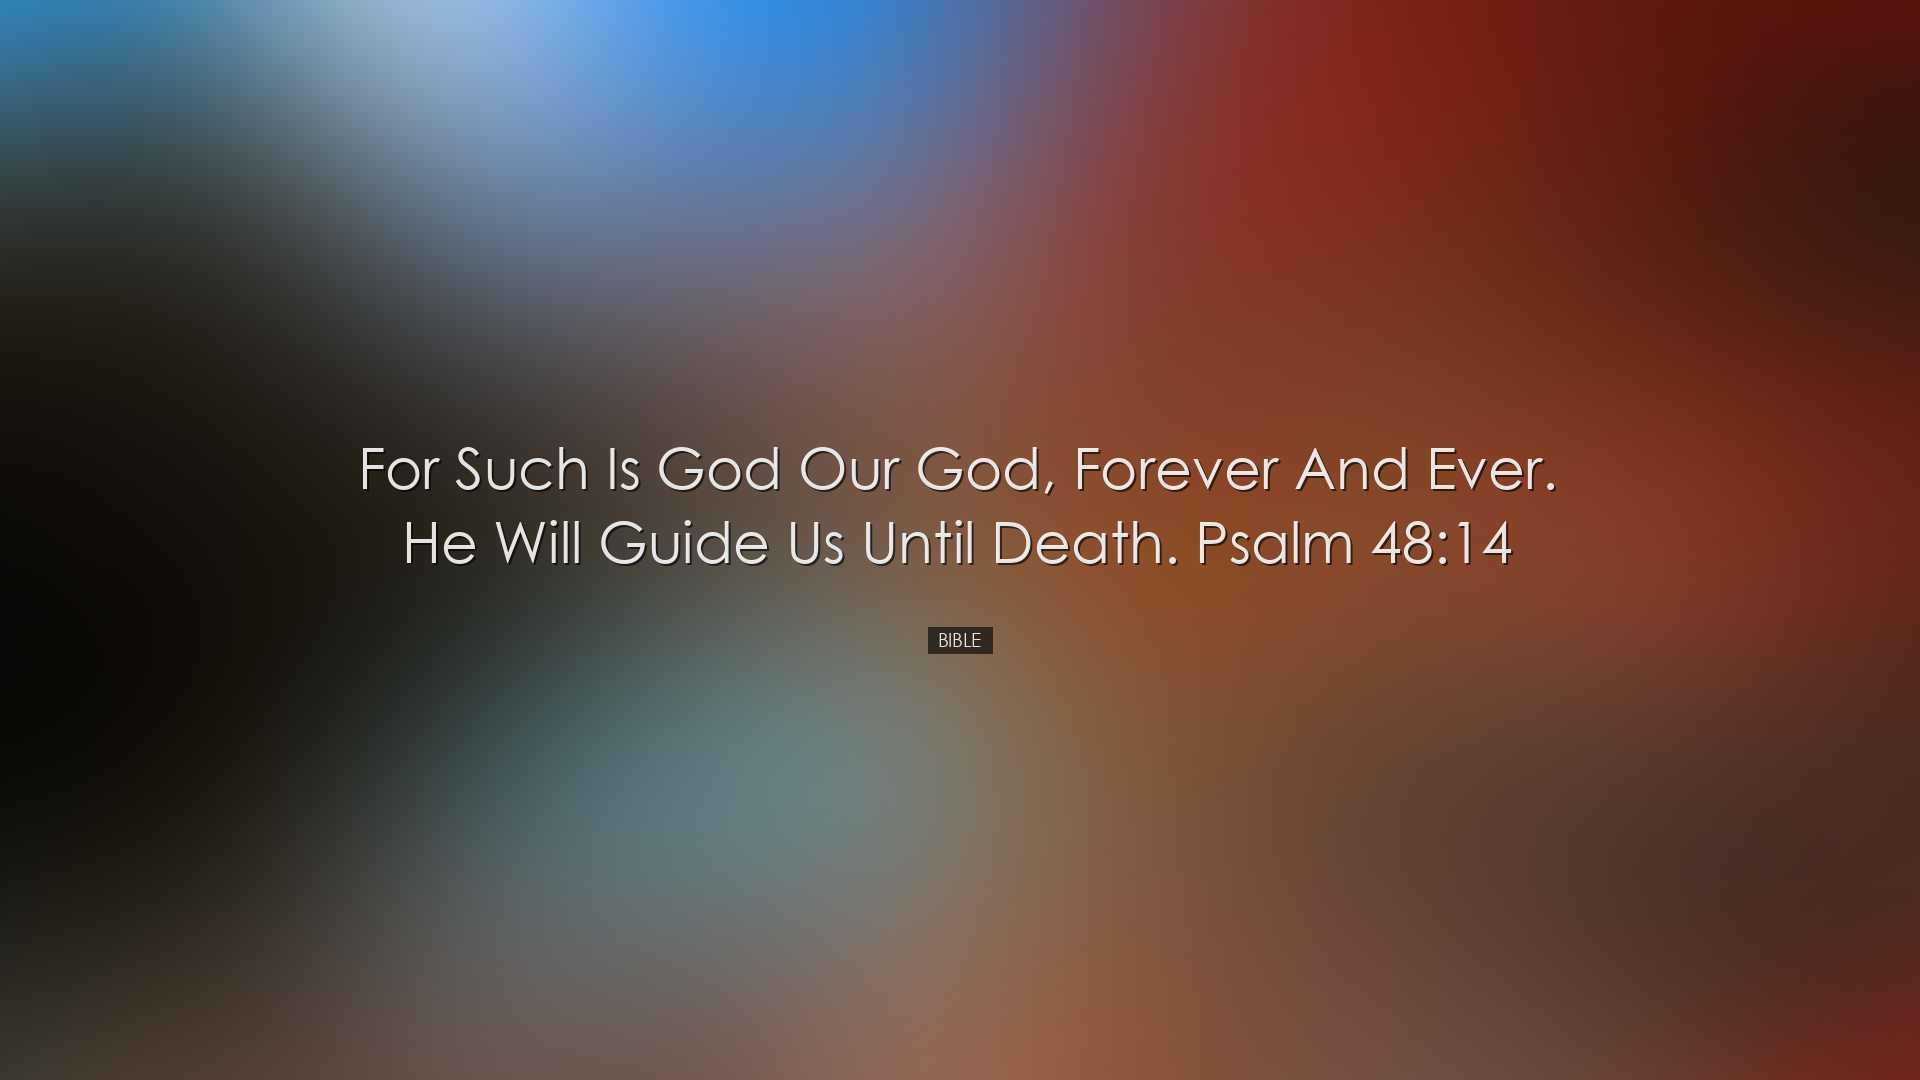 For such is God our God, forever and ever. He will guide us until